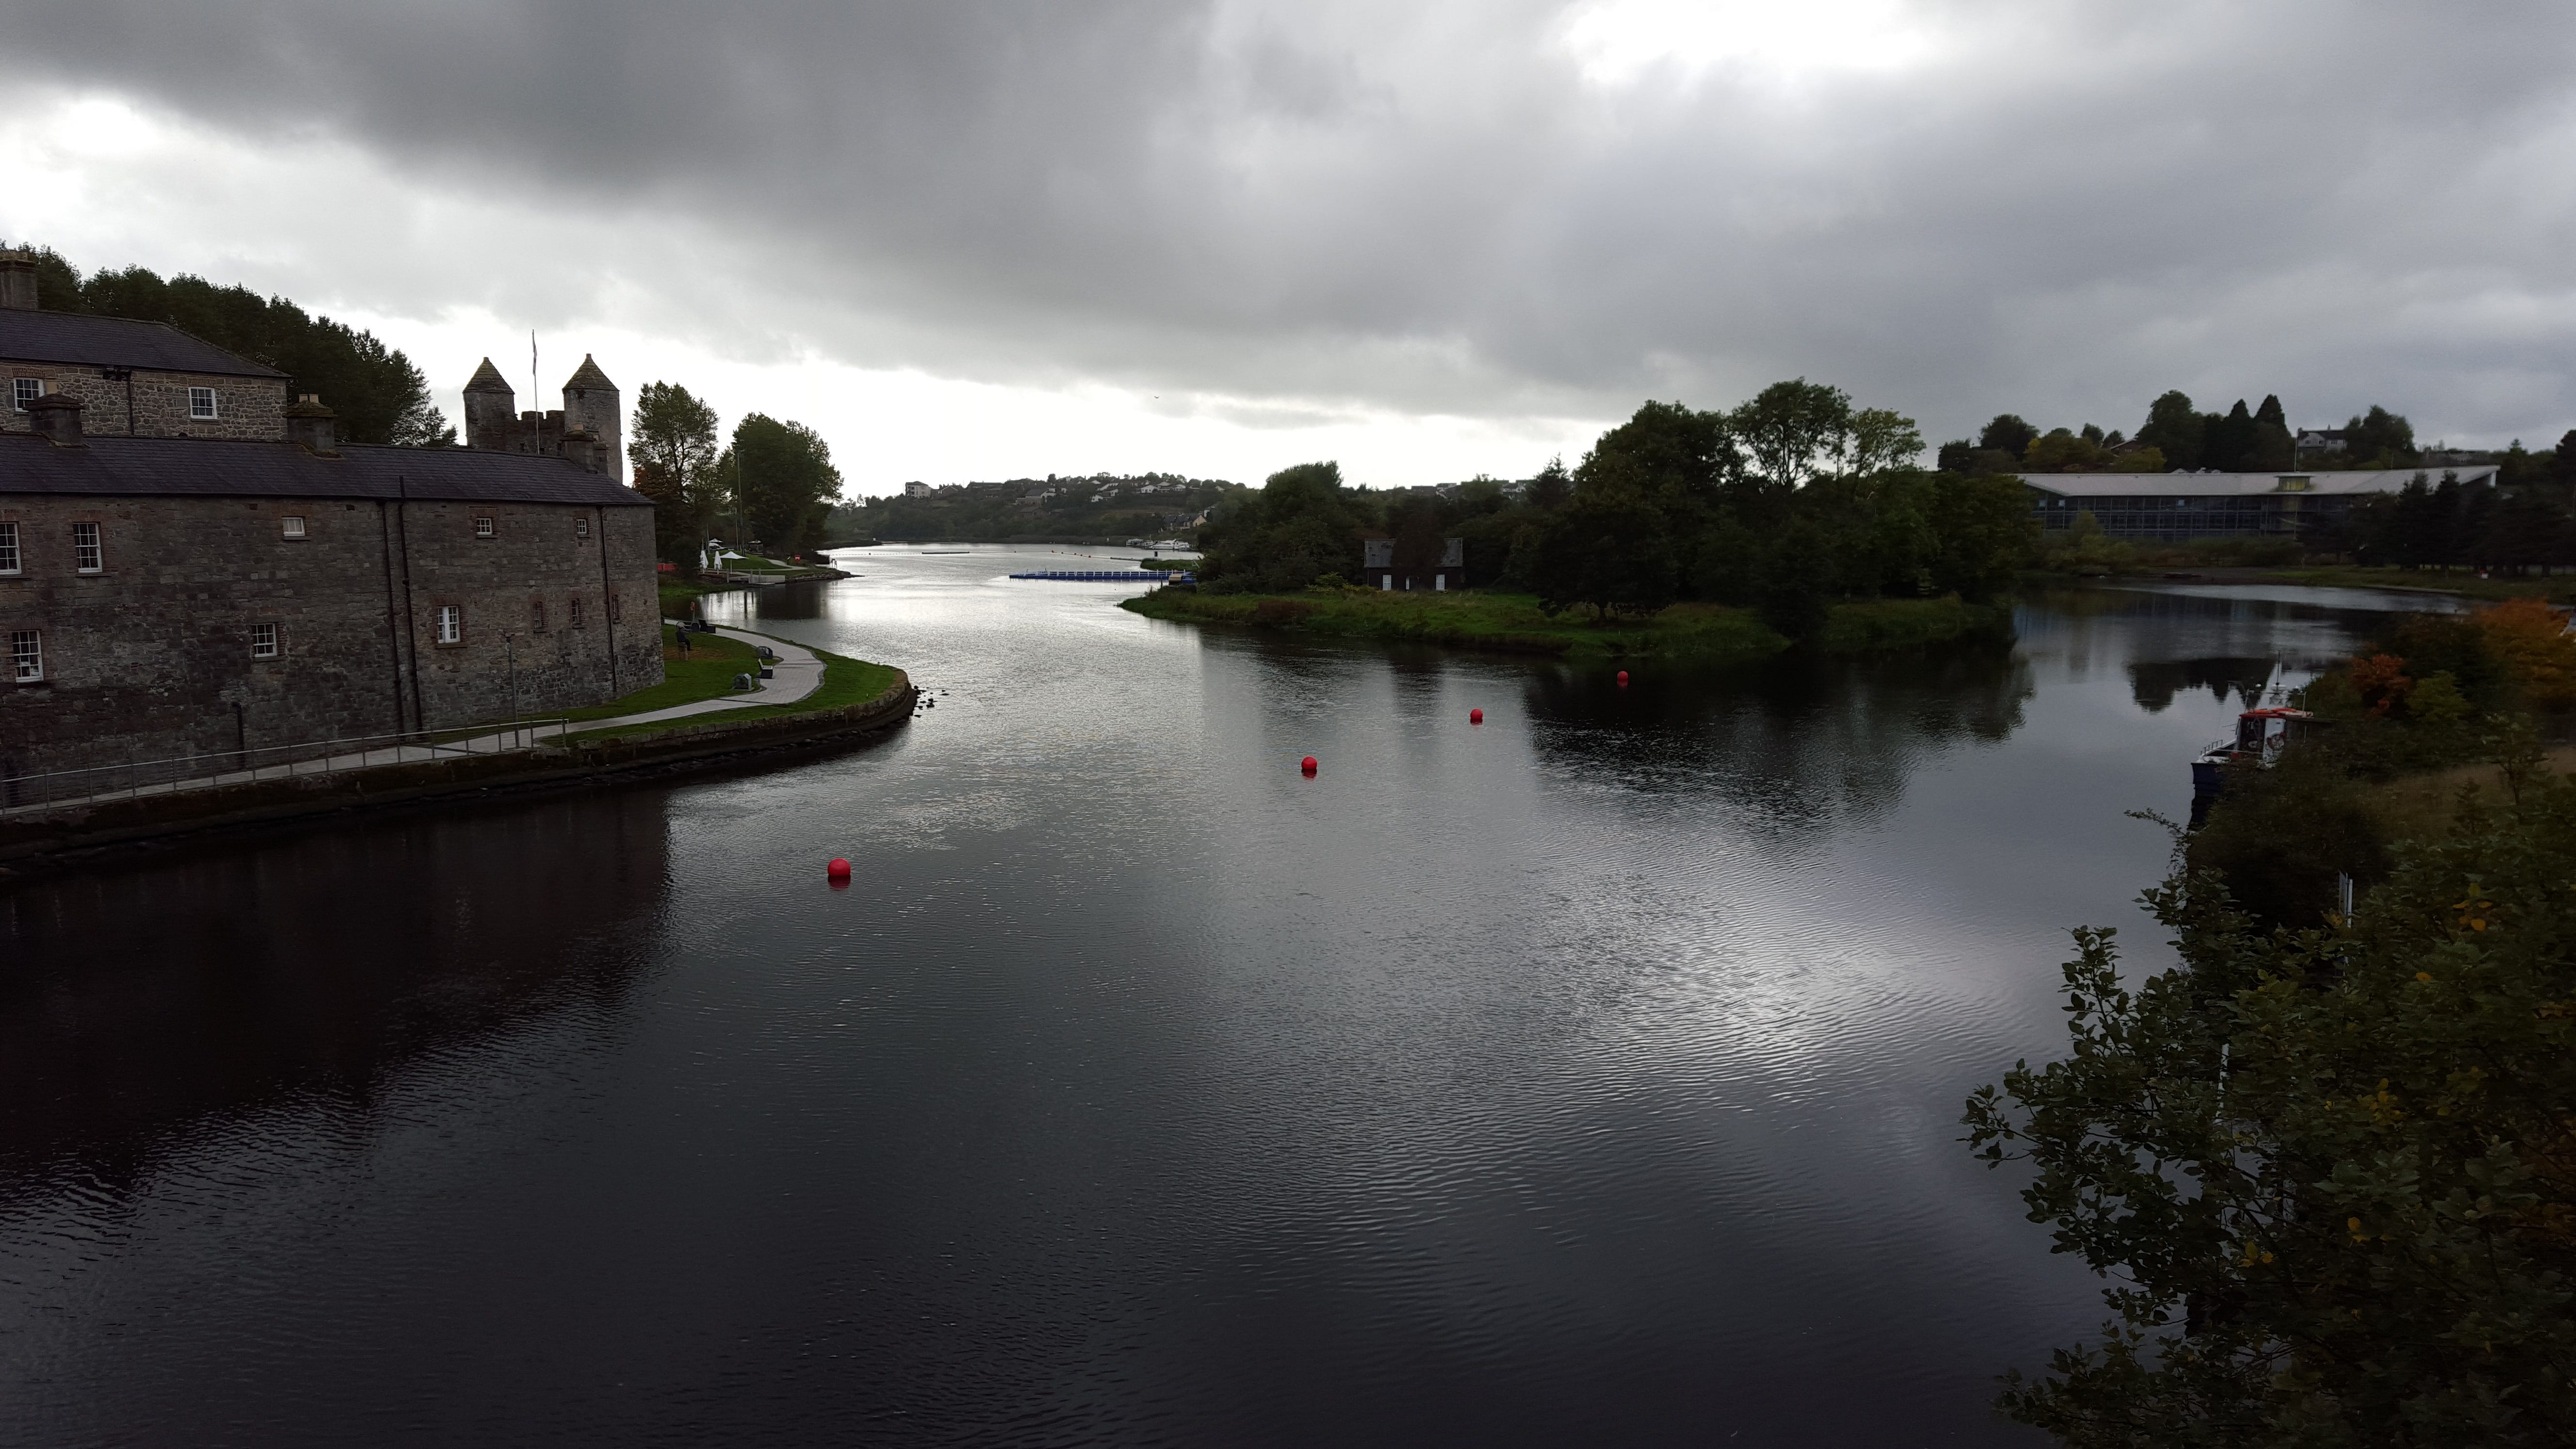 Picture of a river shin ing silver on a dark stormy day with low clouds in the sky and a rcastle to the left, with a river island to the right full of trees